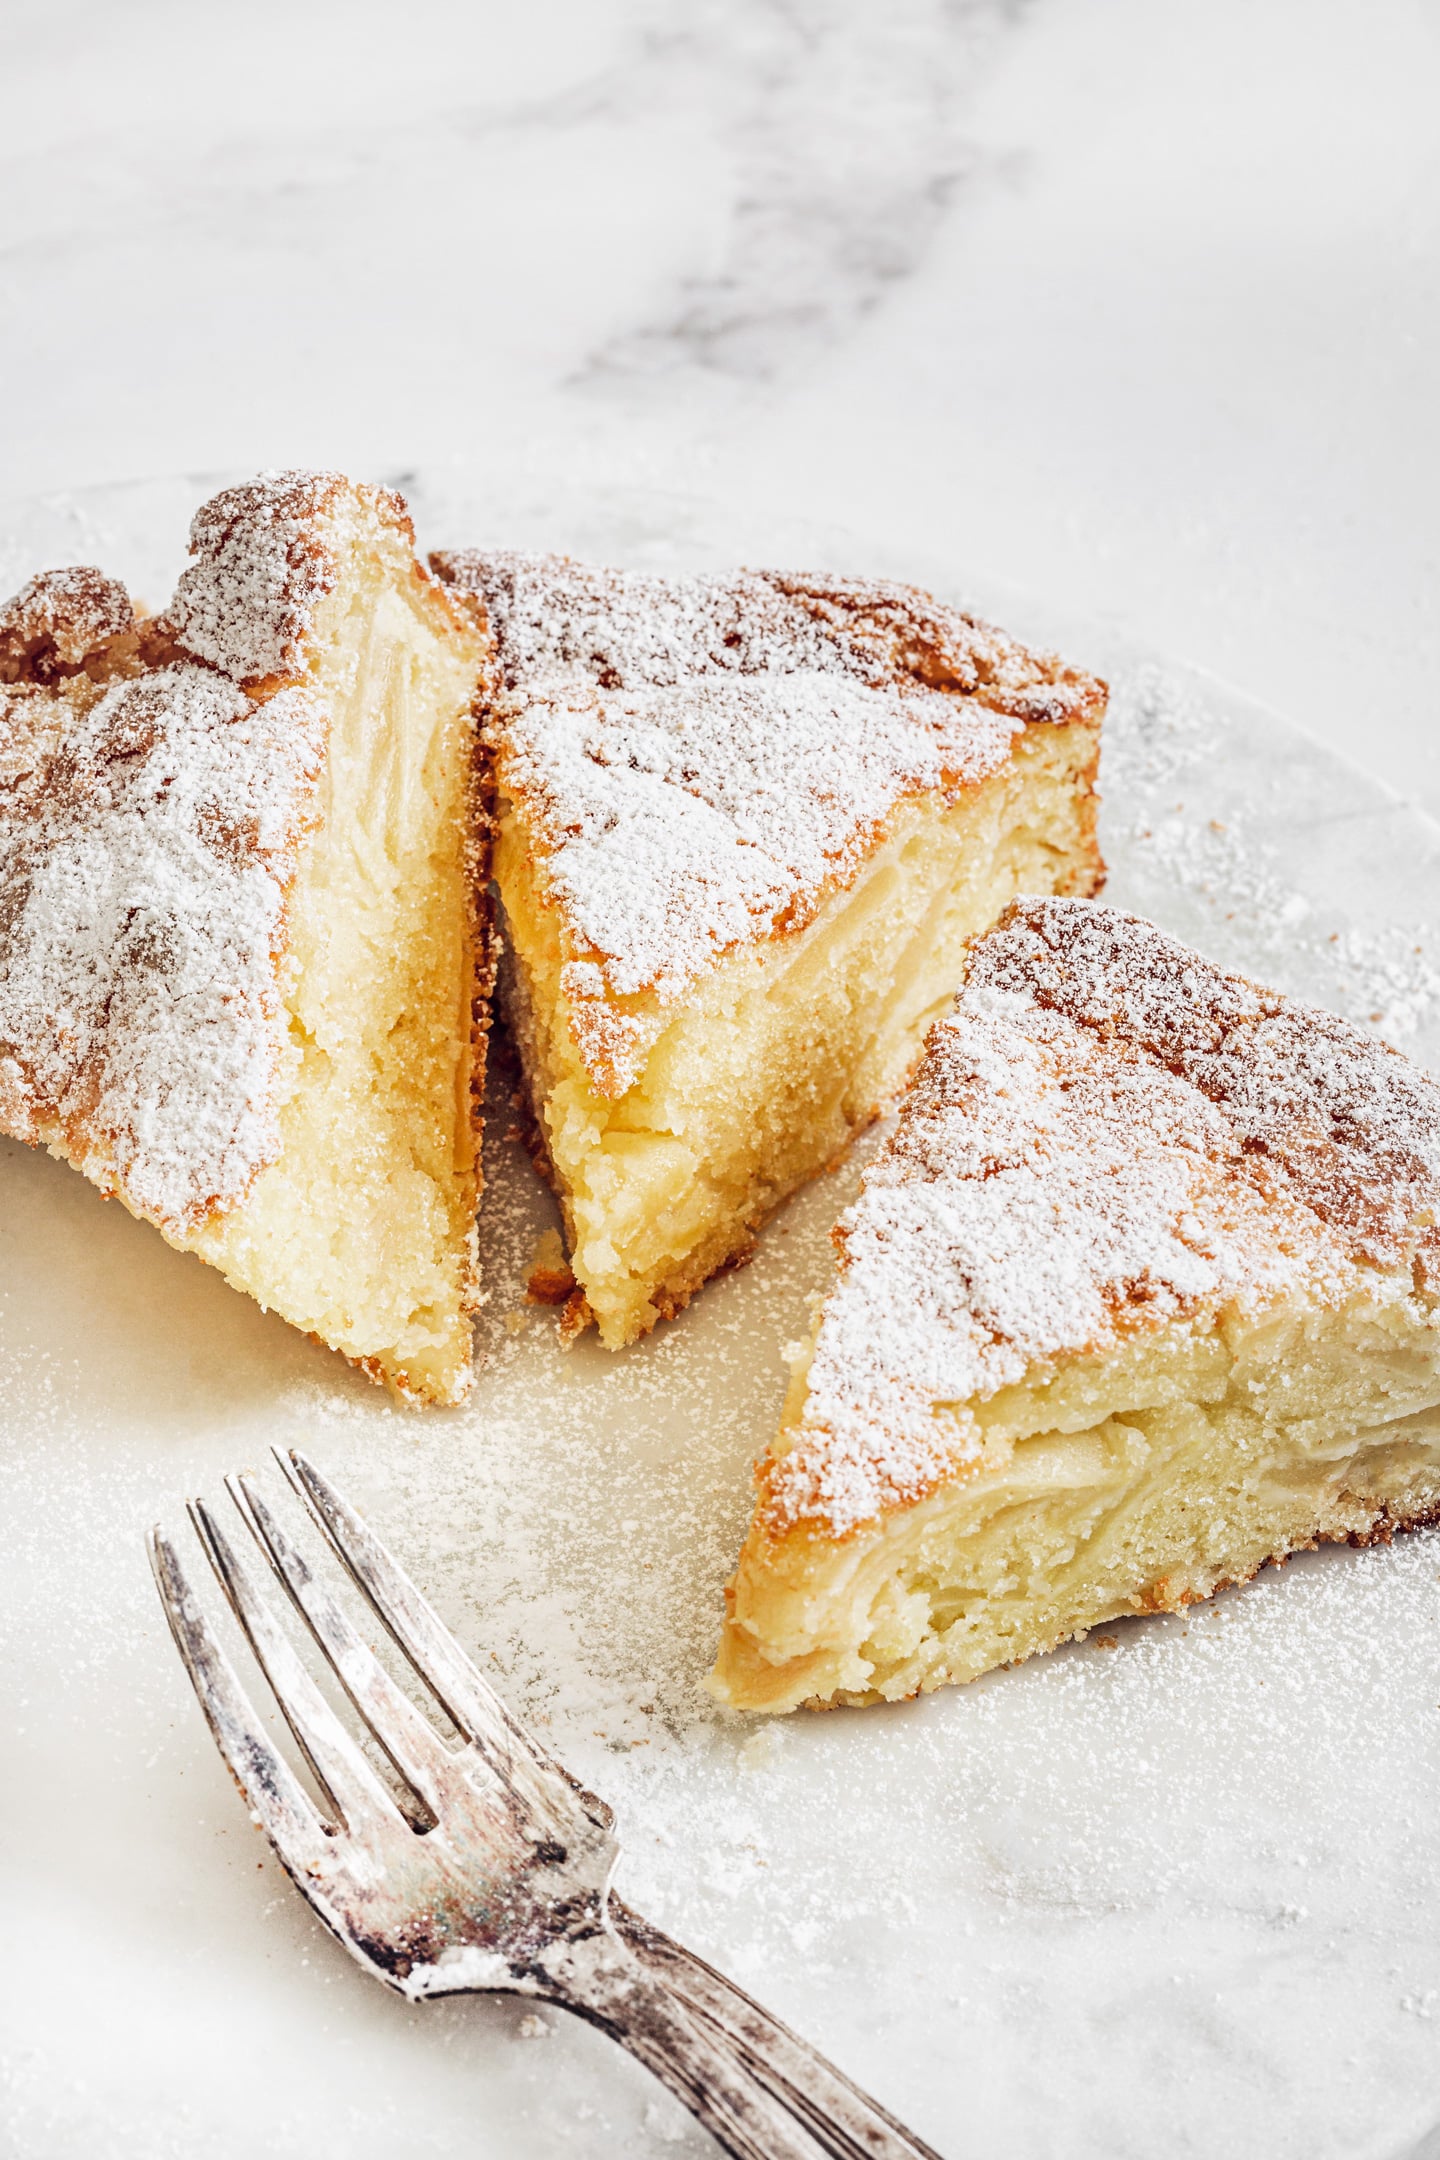 French Apple Cake Recipe Soft And Moist Sweetly Cakes Melted Apples